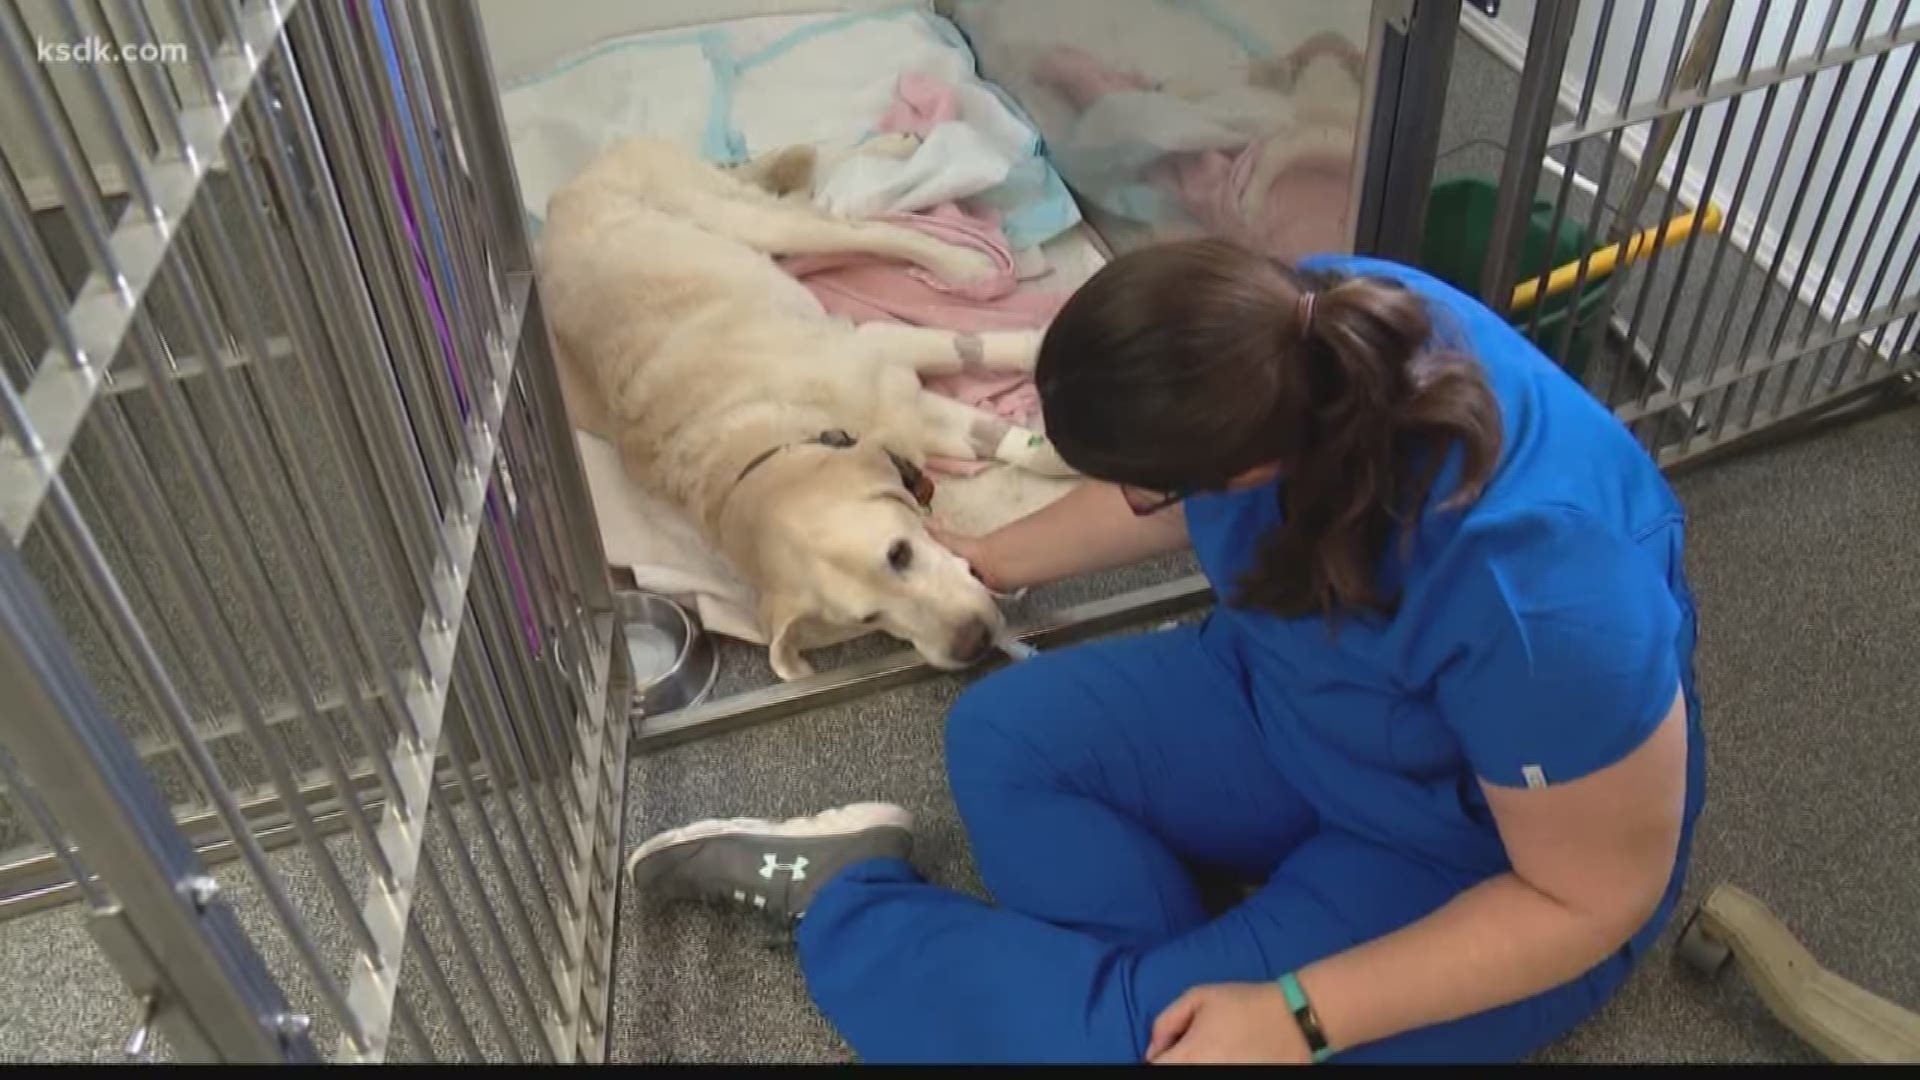 What do you do if your furry friend gets sick in the middle of the night? Emergency hospitals for animals play a crucial role. We went inside one of the busiest animal ERs in the area that never closes.